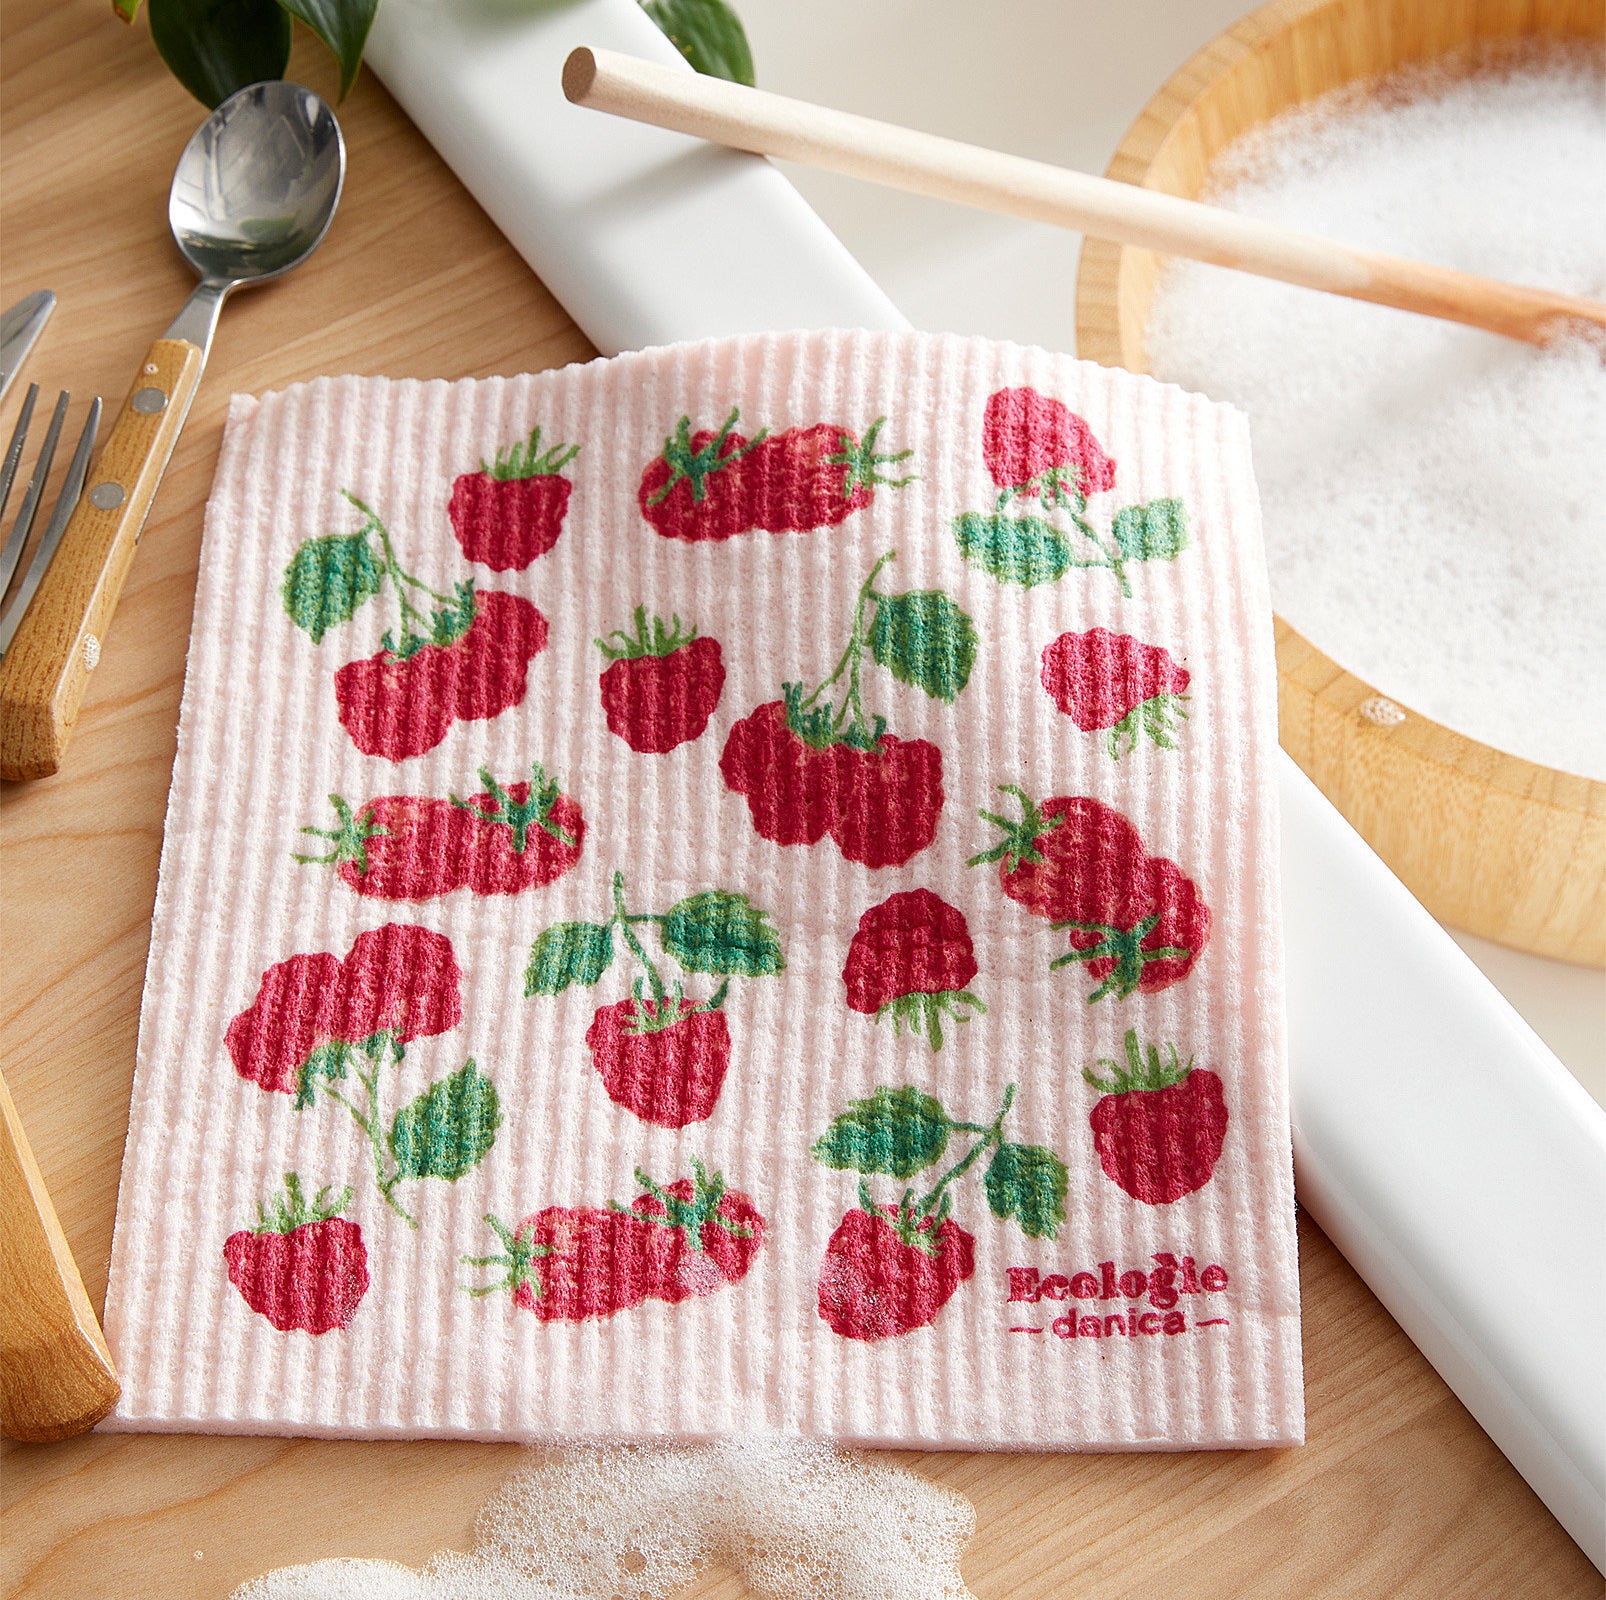 A dishcloth on a counter